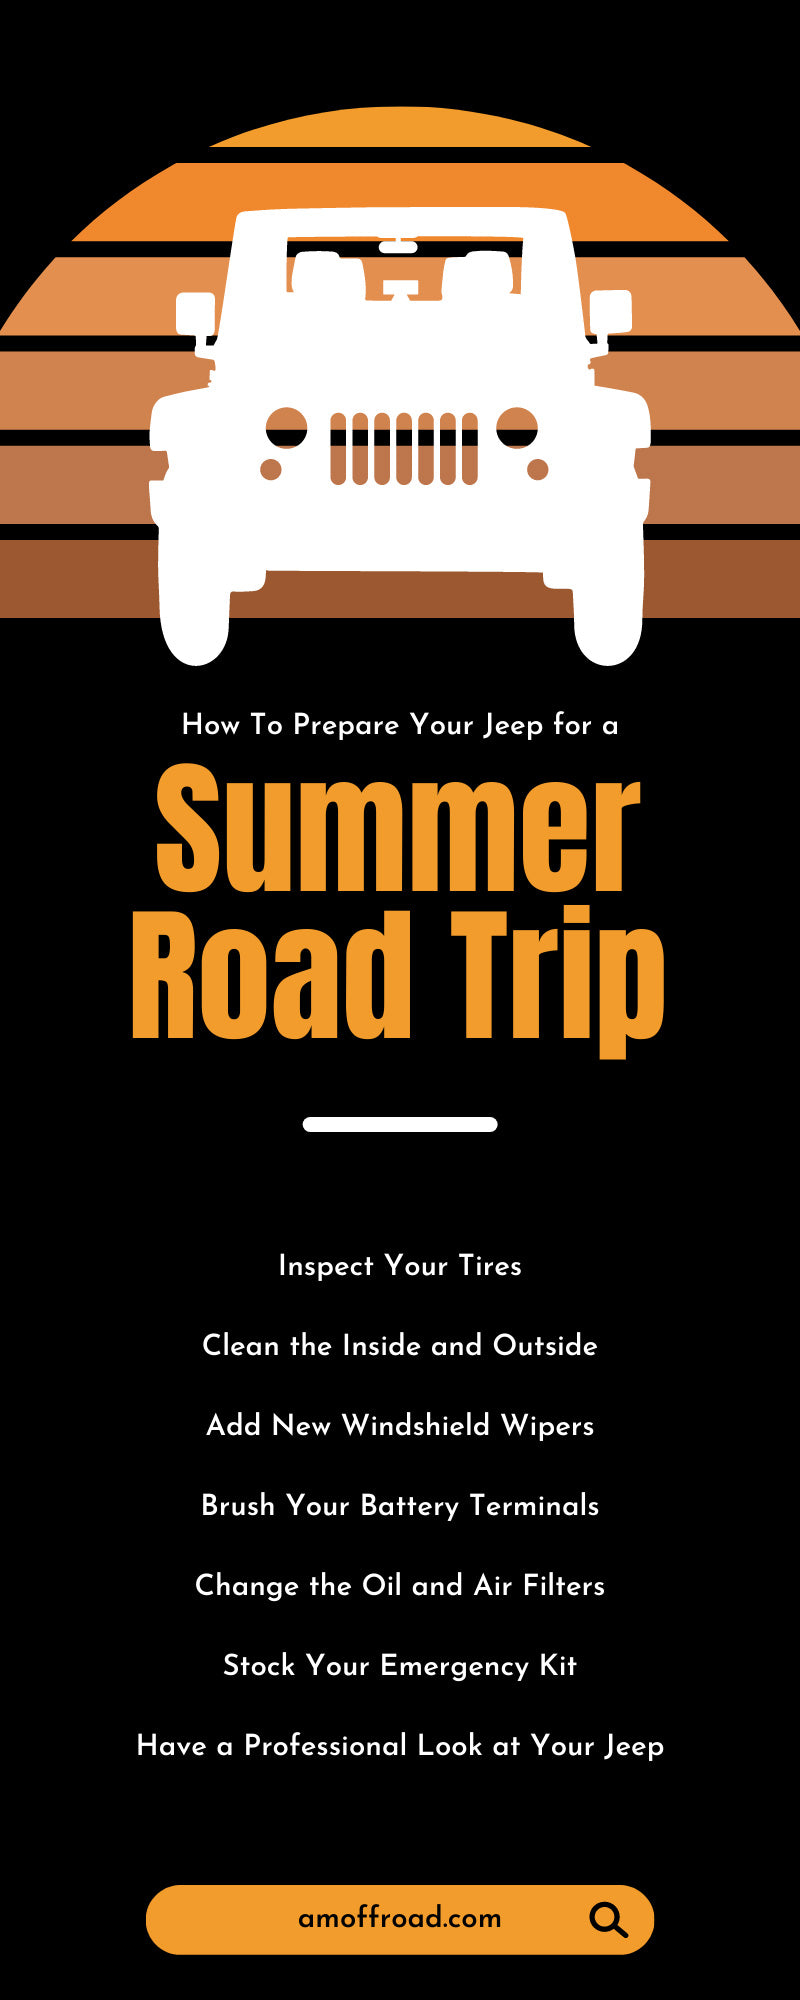 How To Prepare Your Jeep for a Summer Road Trip